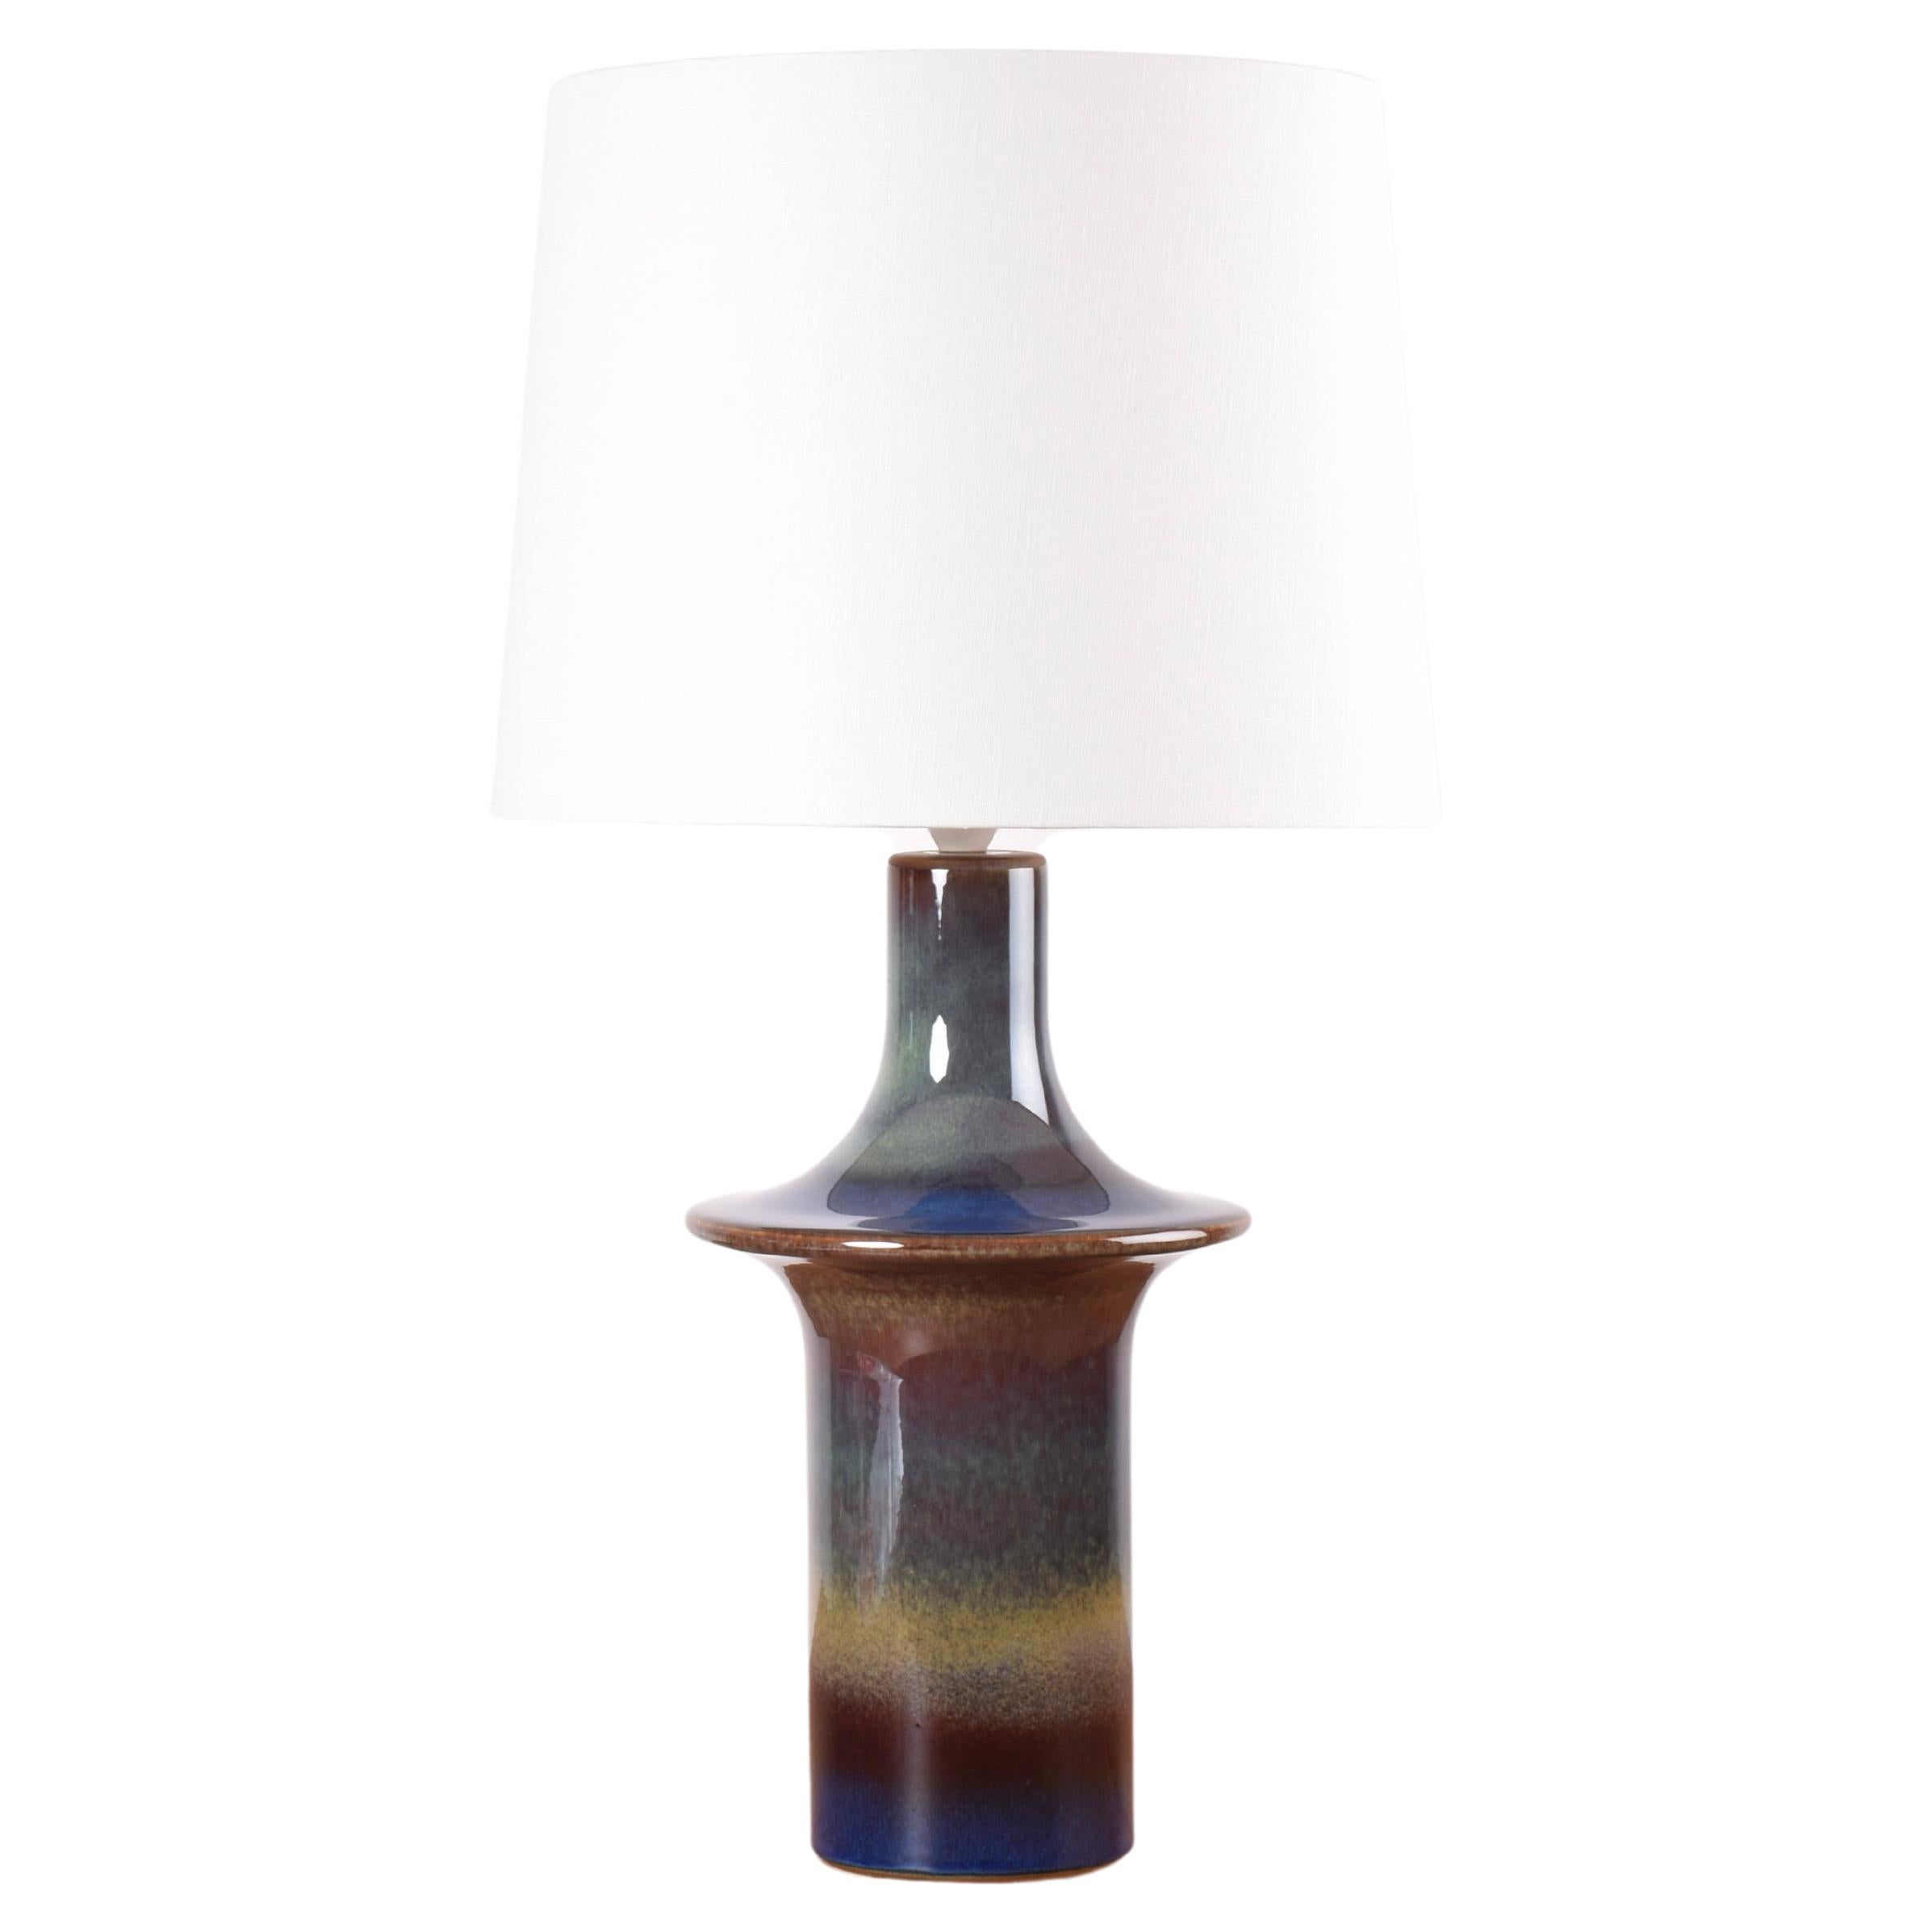 Danish Søholm Sculptural Table Lamp Ufo Shaped Multi Colored, Modern Light 1960s For Sale